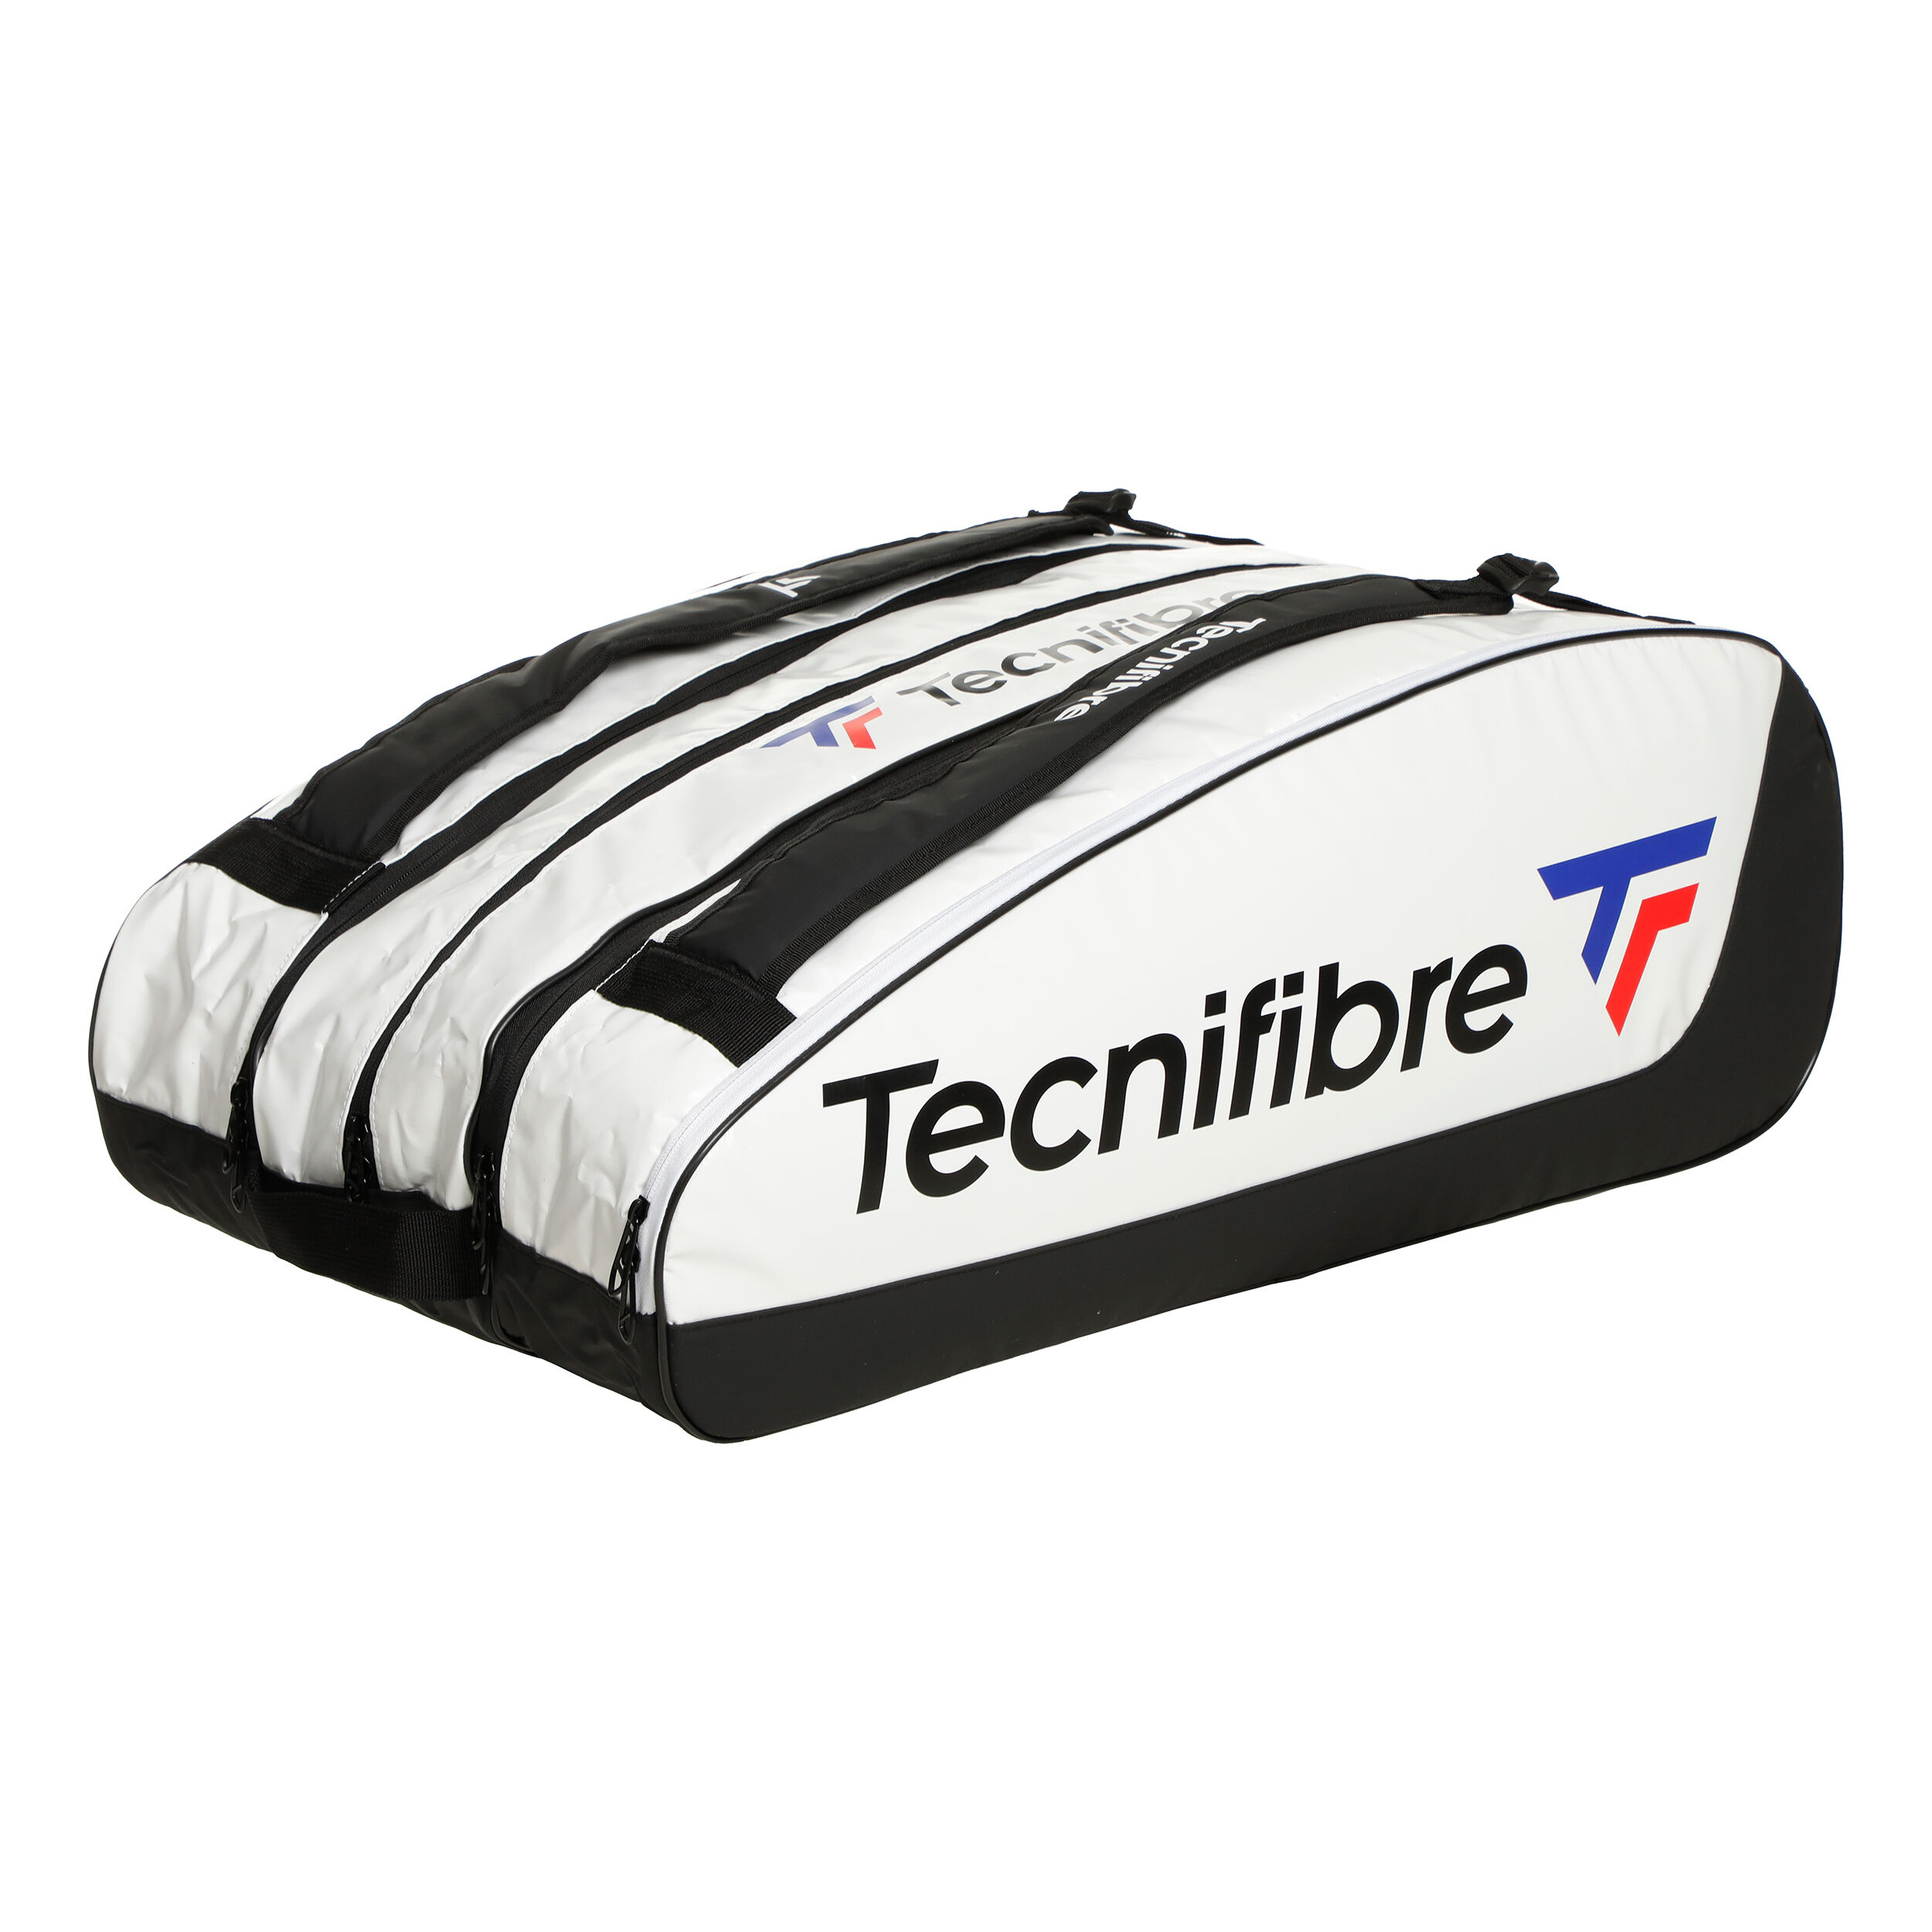 Buy Tennis bags from Tecnifibre online | Tennis-Point